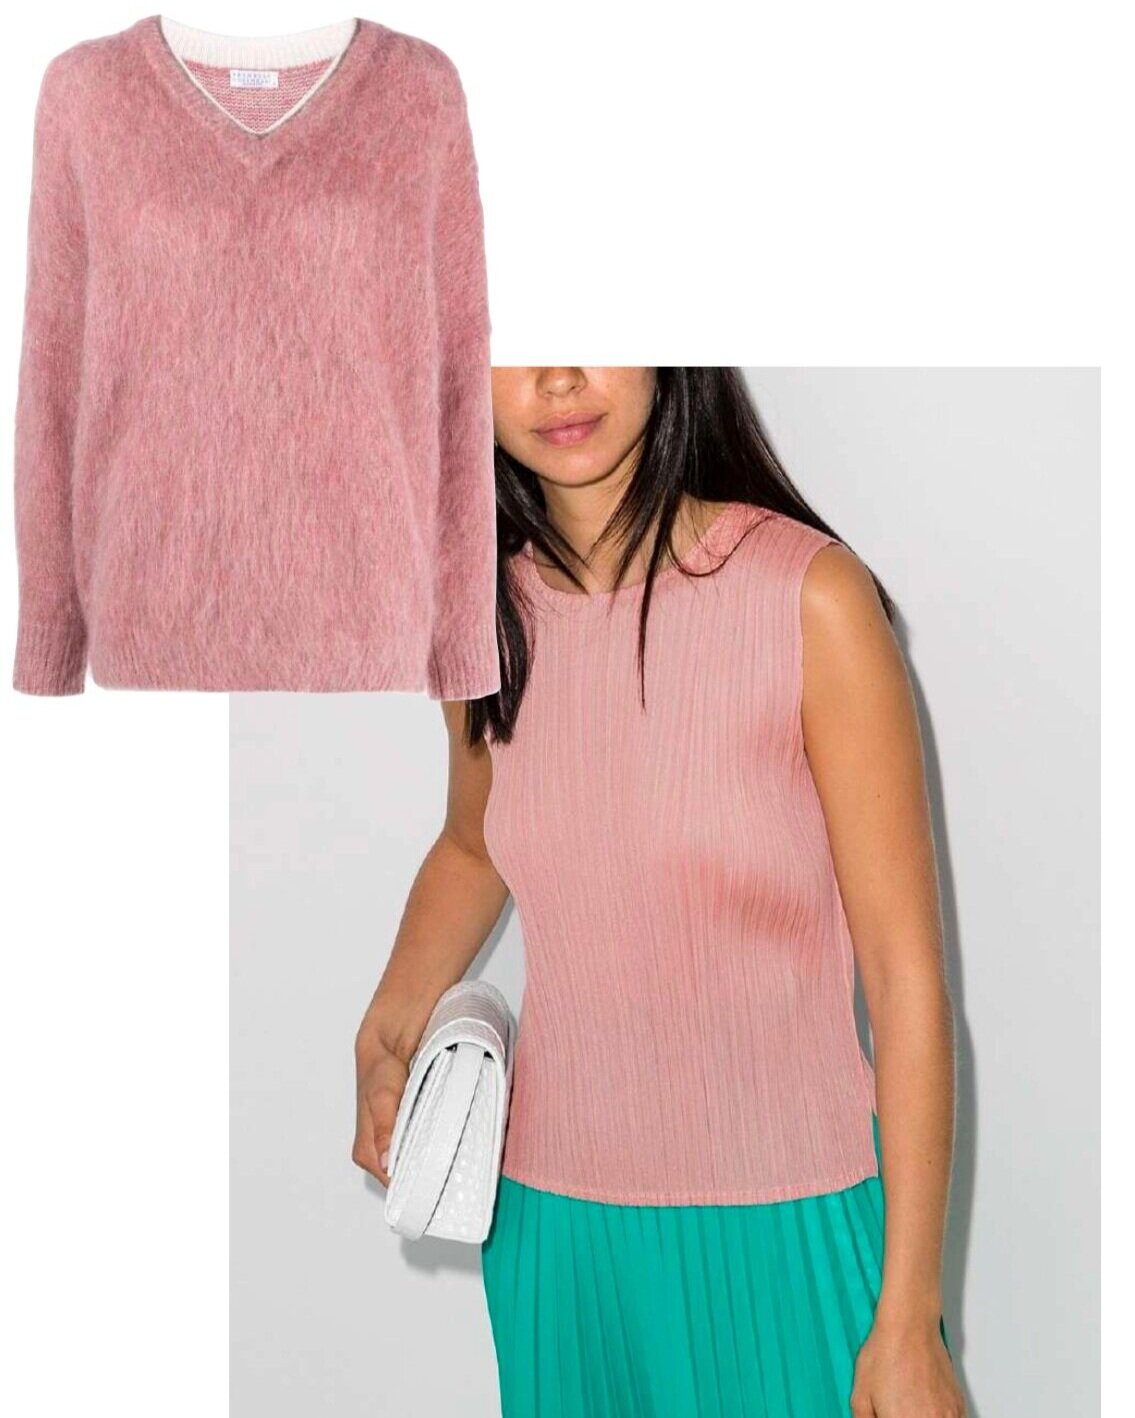  A  sleeveless top ,  fuzzy sweater  and pleated skirt make this a day to evening look. 